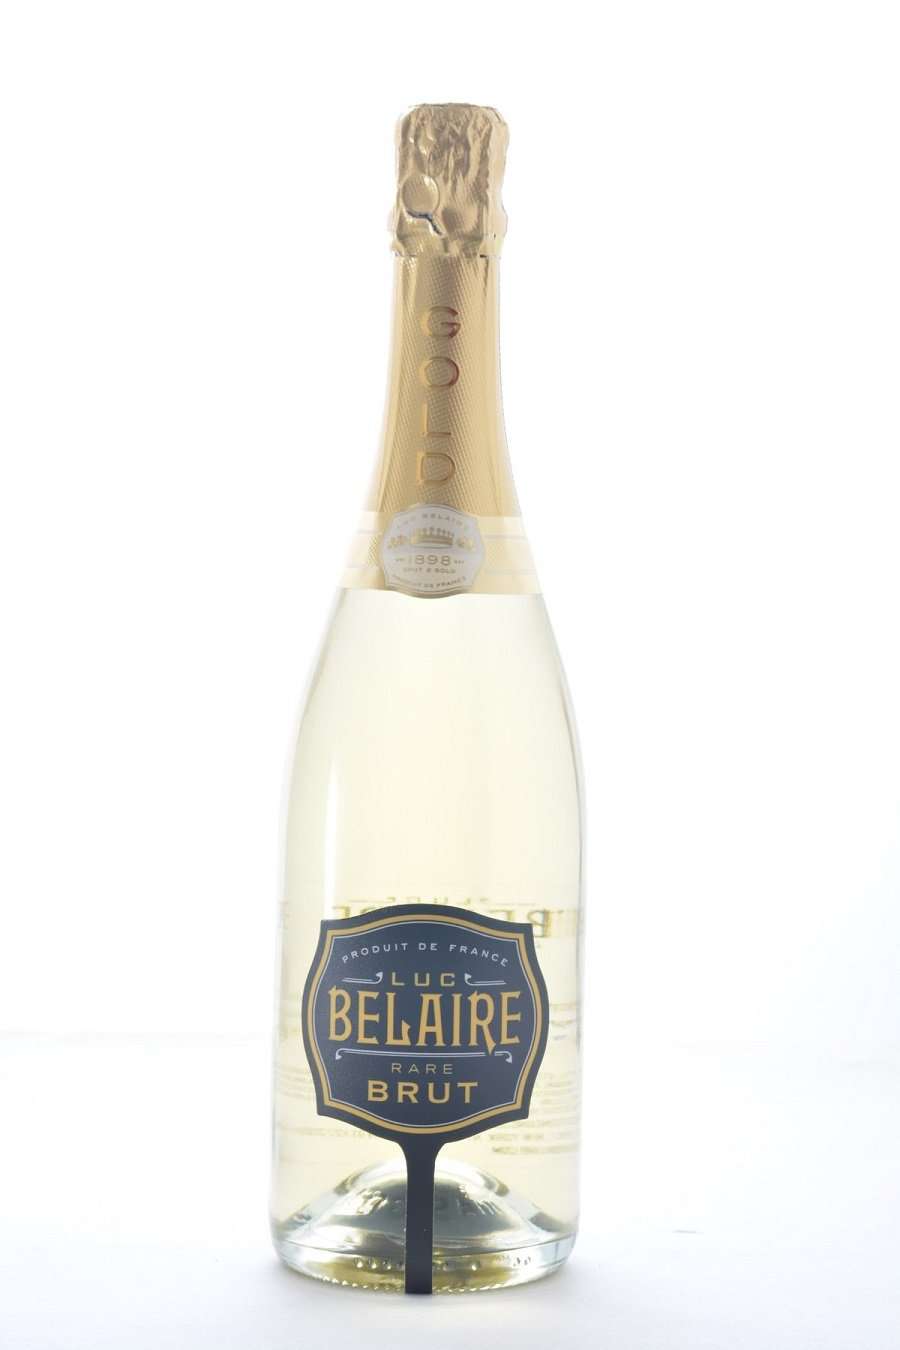 Belair Rare Luxe Champagne 750ml